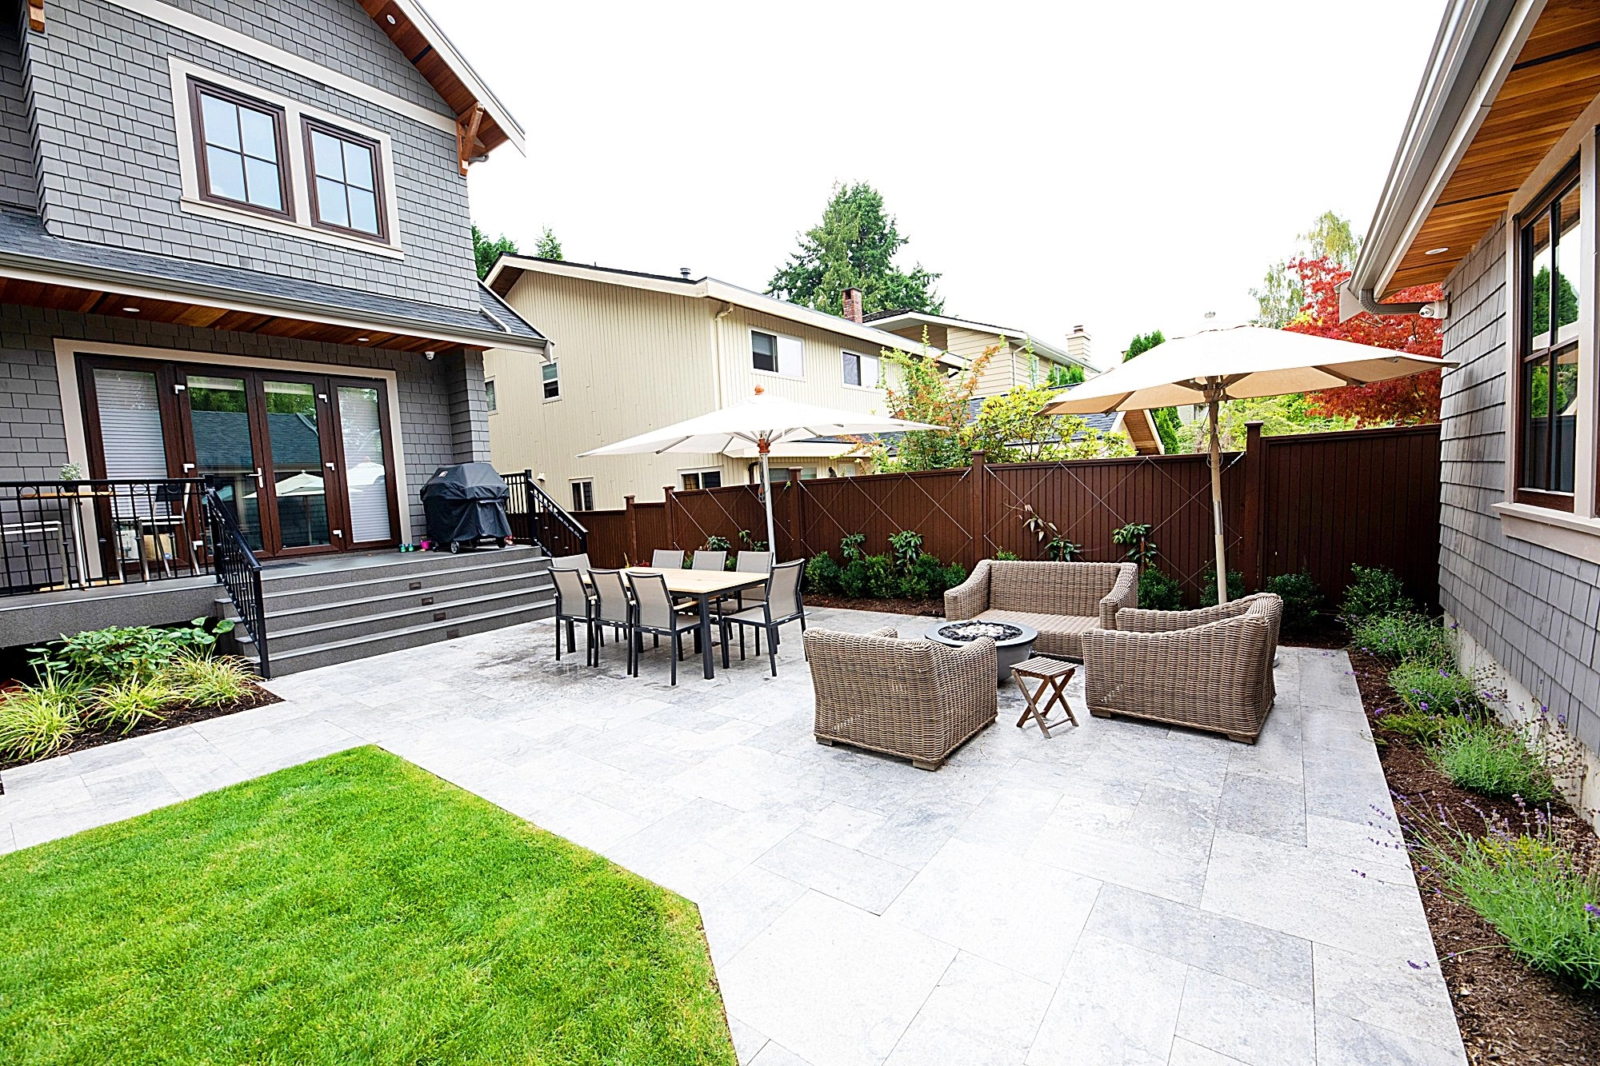 A picture of a backyard deck with numerous tables and chairs as well as lounge umbrellas.